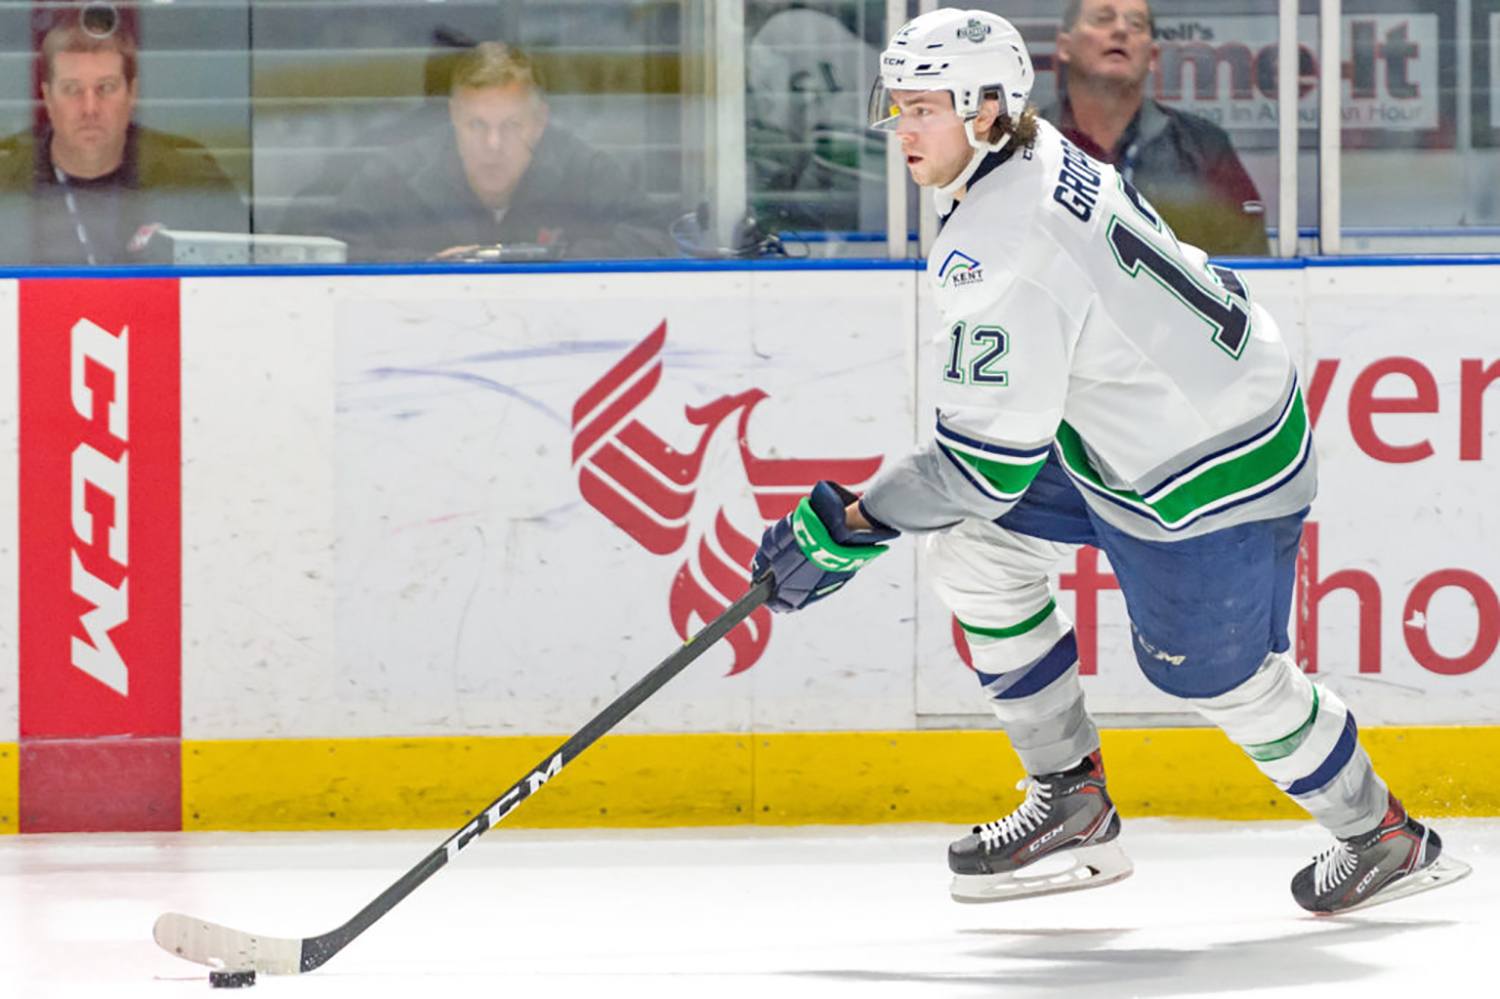 Ryan Gropp had a hat trick, boosting his goal total to 28 this season, as the Thunderbirds shot down the Rockets on Saturday night. COURTESY PHOTO, Brian Liesse/T-Birds